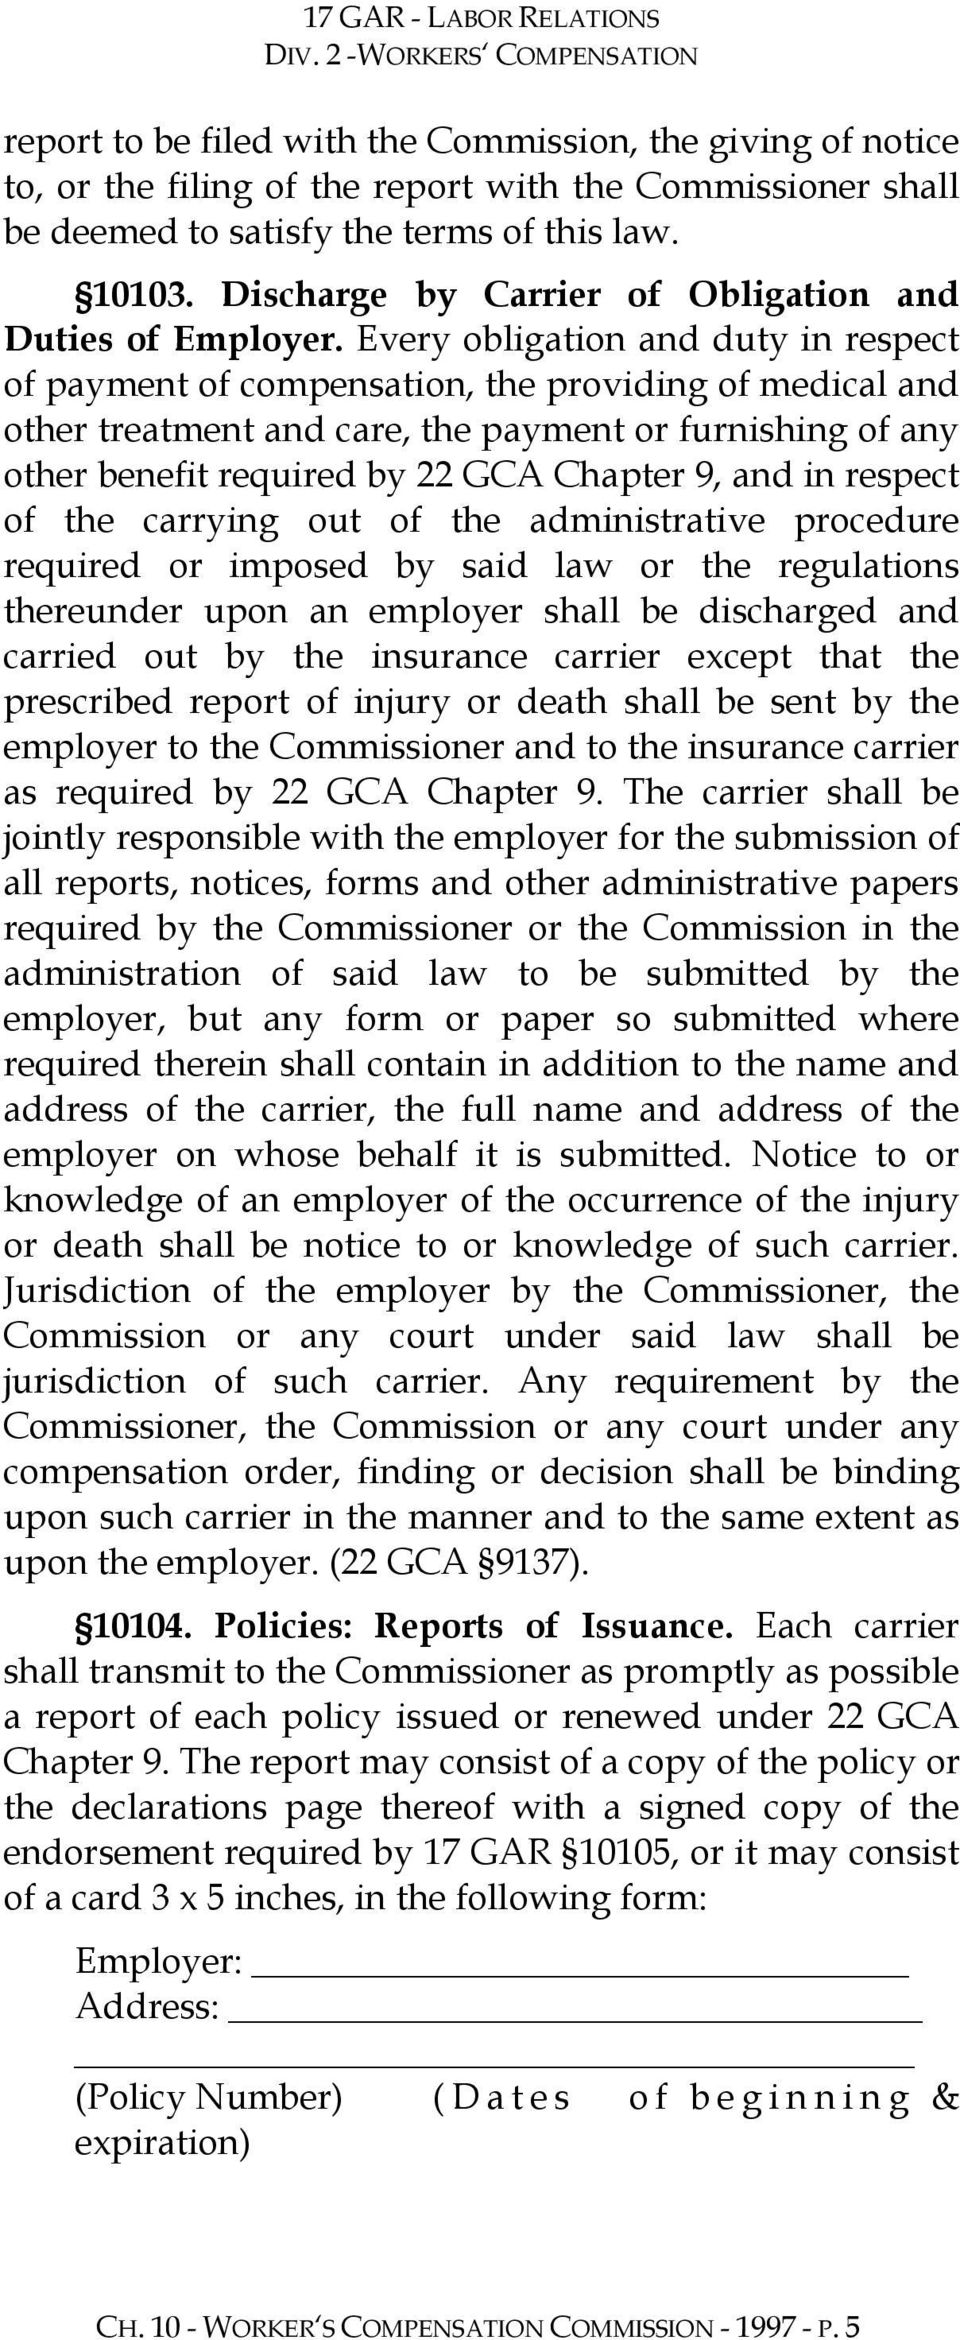 Every obligation and duty in respect of payment of compensation, the providing of medical and other treatment and care, the payment or furnishing of any other benefit required by 22 GCA Chapter 9,